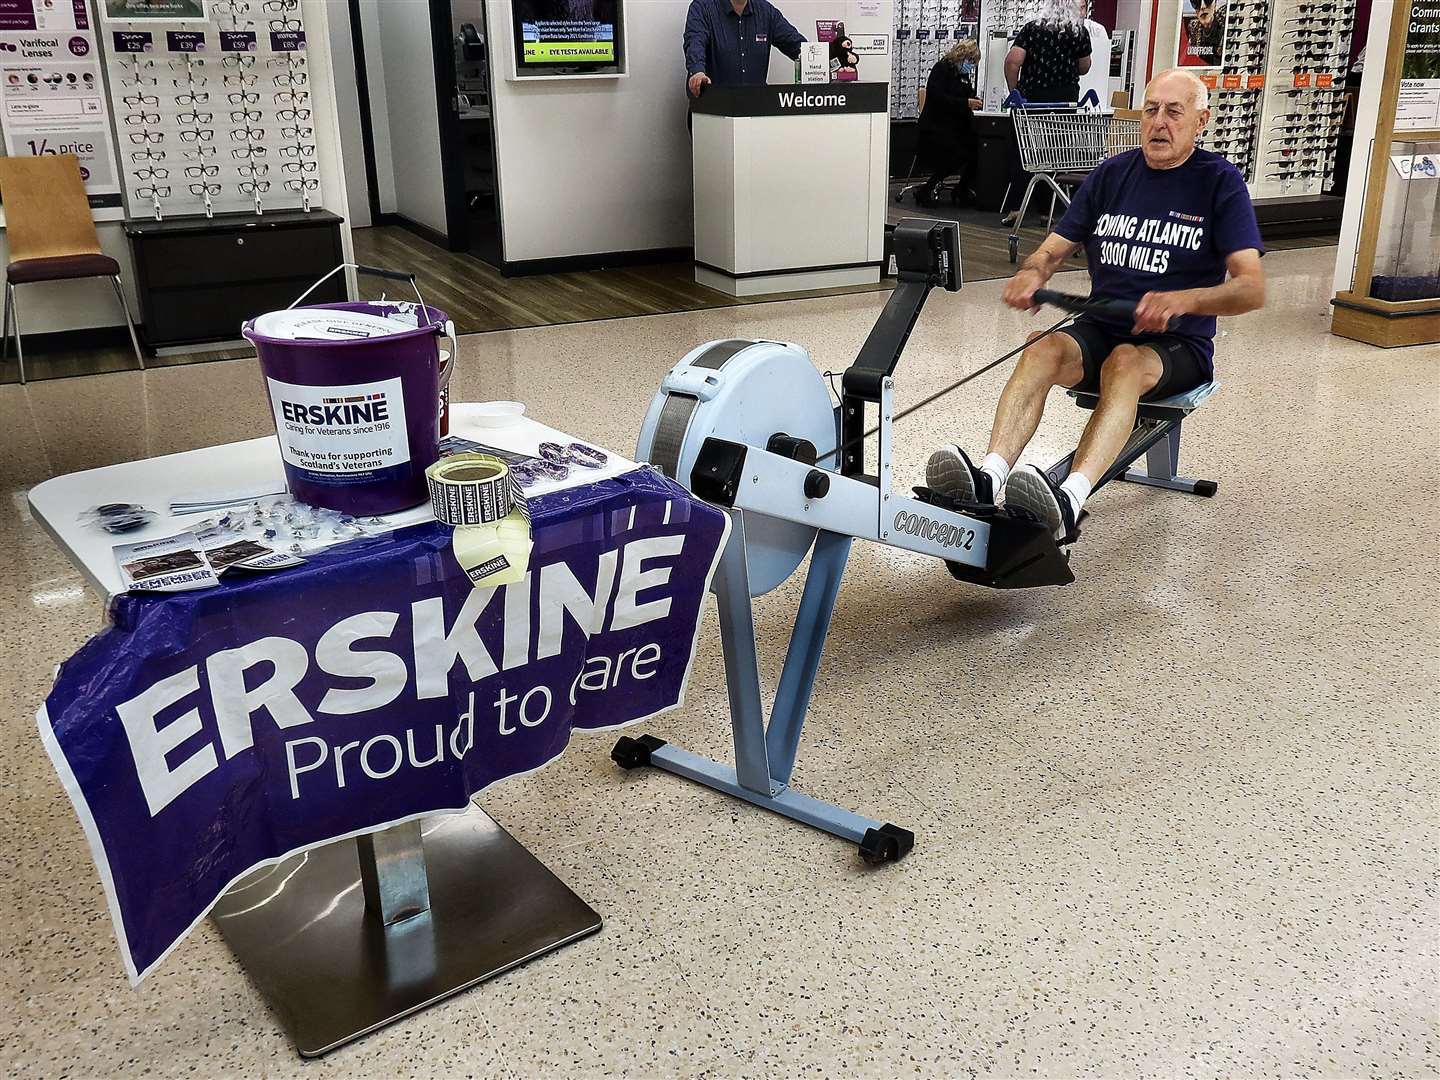 Johnnie Baillie spending his 80th birthday “rowing the Atlantic” at Tesco Retail Park store on 21st July last year.